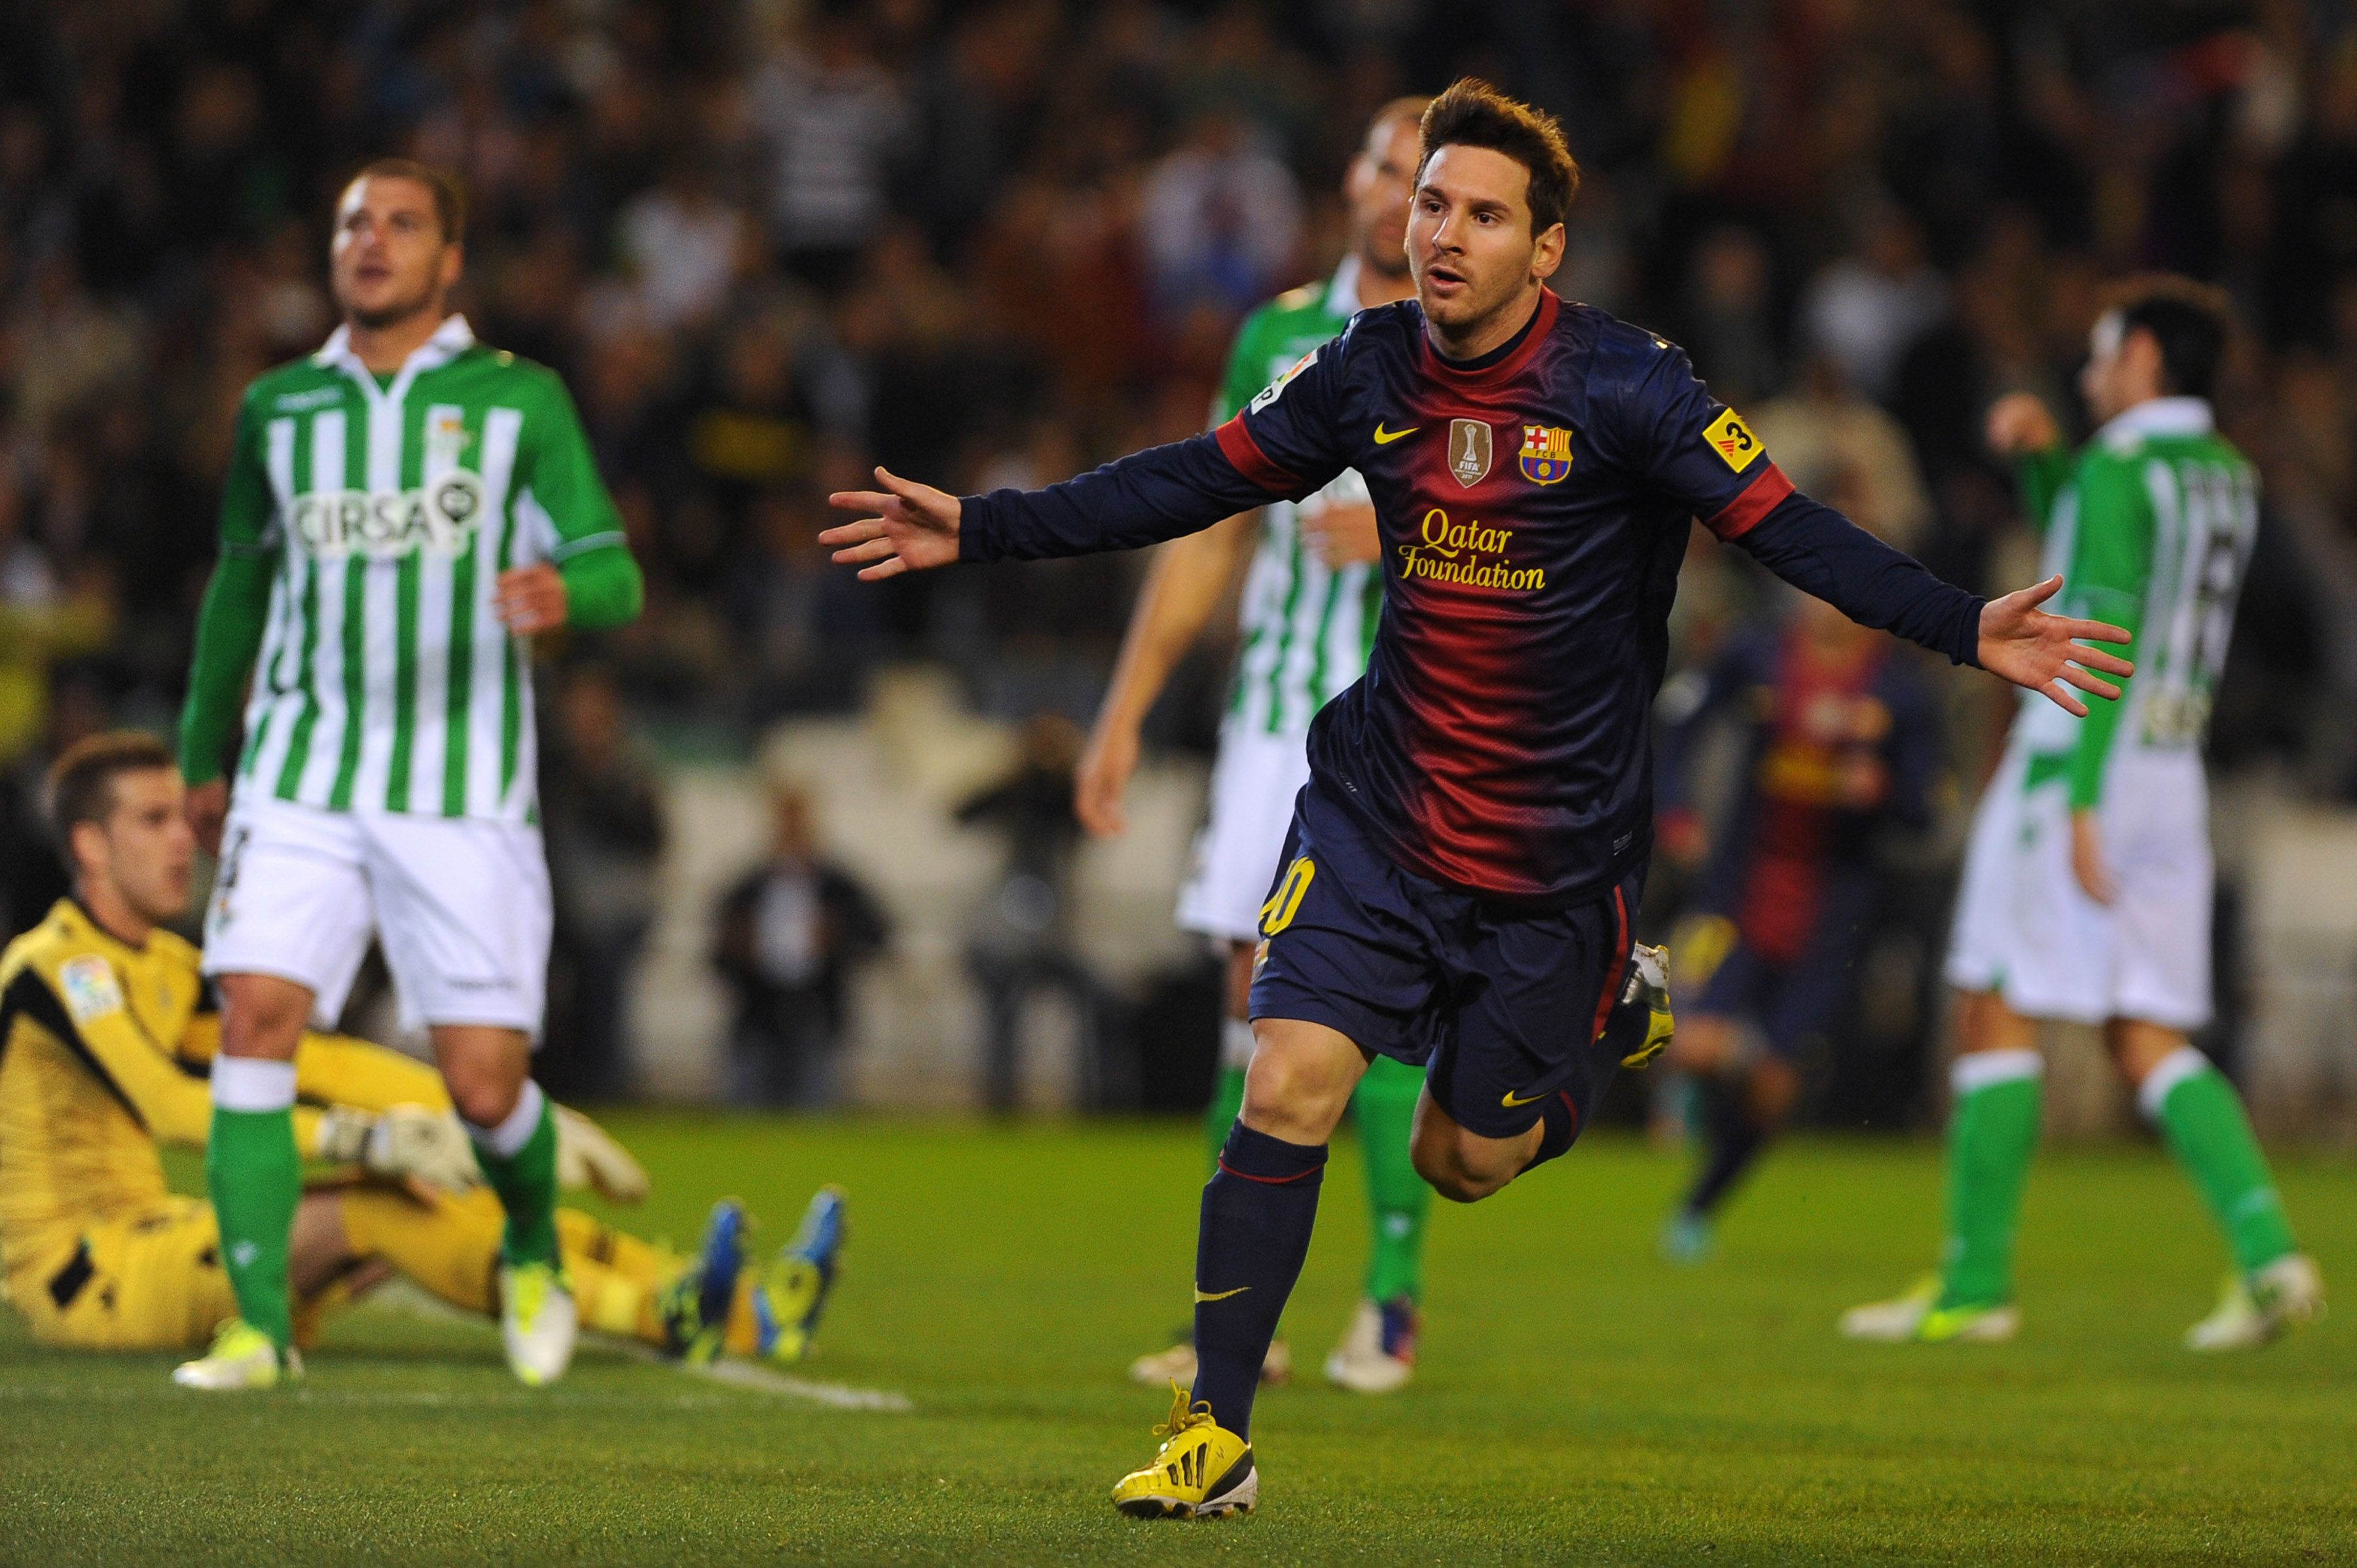 FC Barcelona News: 25 April 2012; Barca eliminated from the Champions  League - Barca Blaugranes